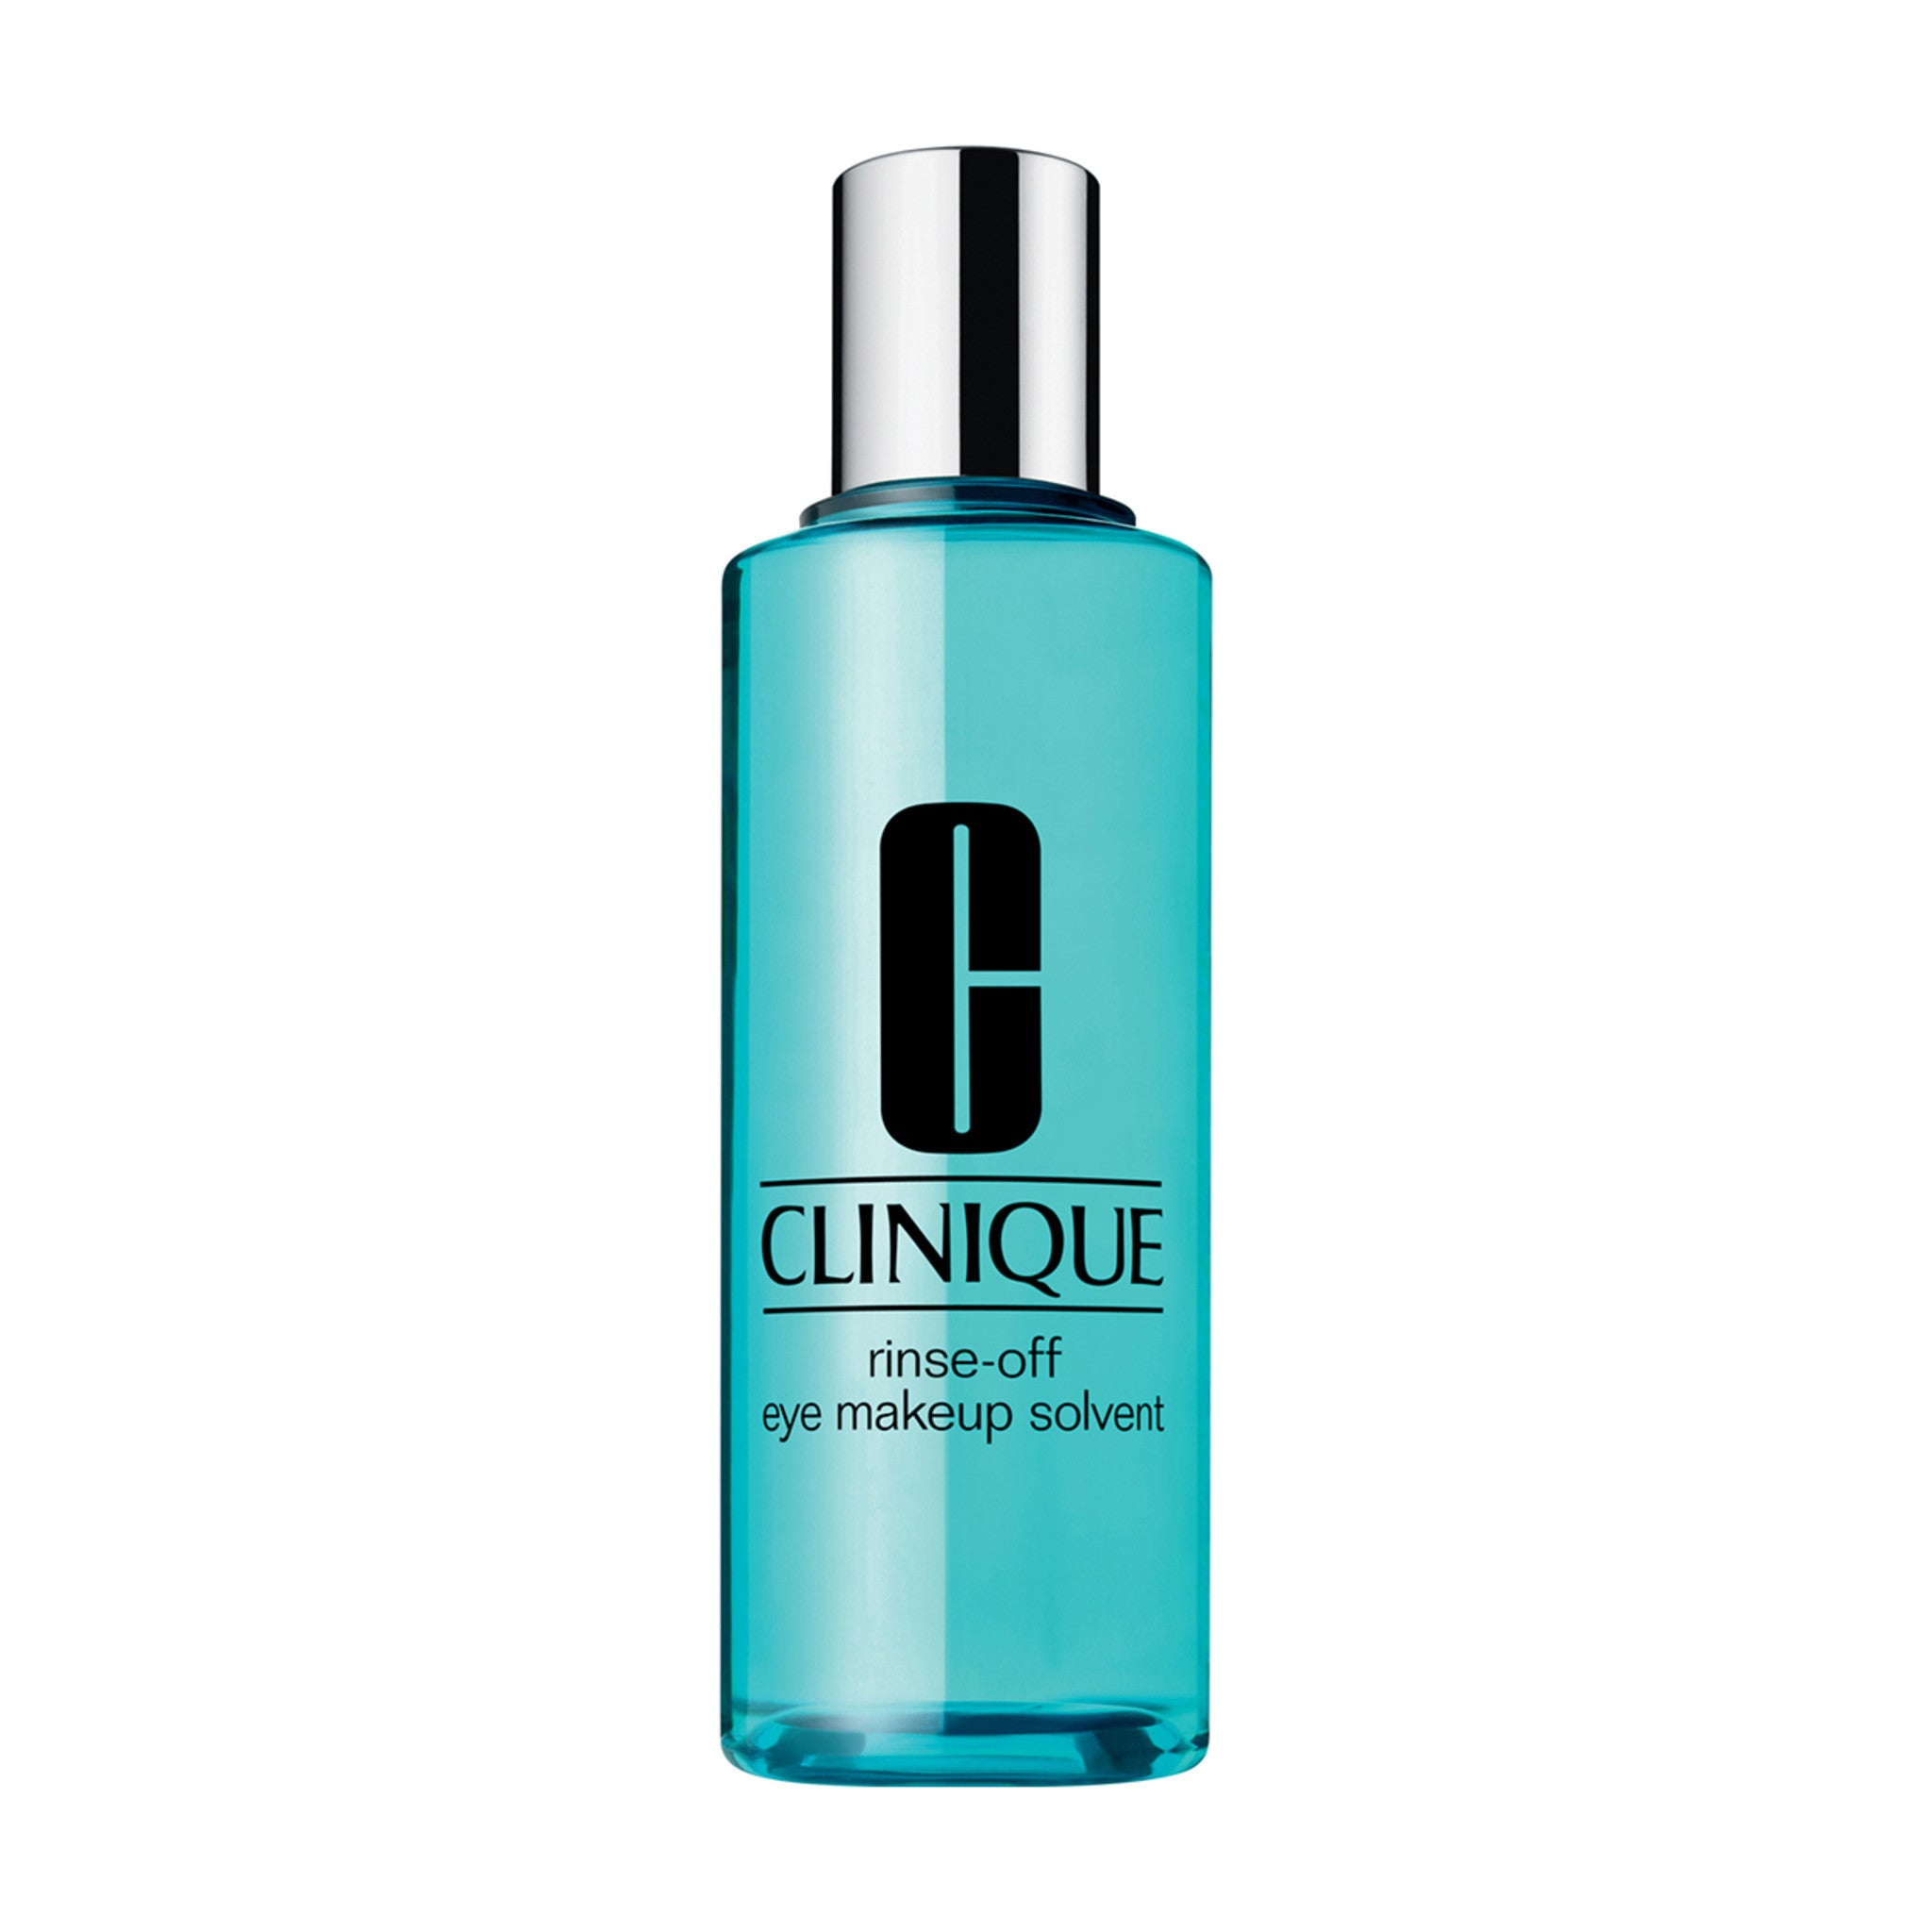 Clinique Rinse Off Eye Makeup Solvent main image.